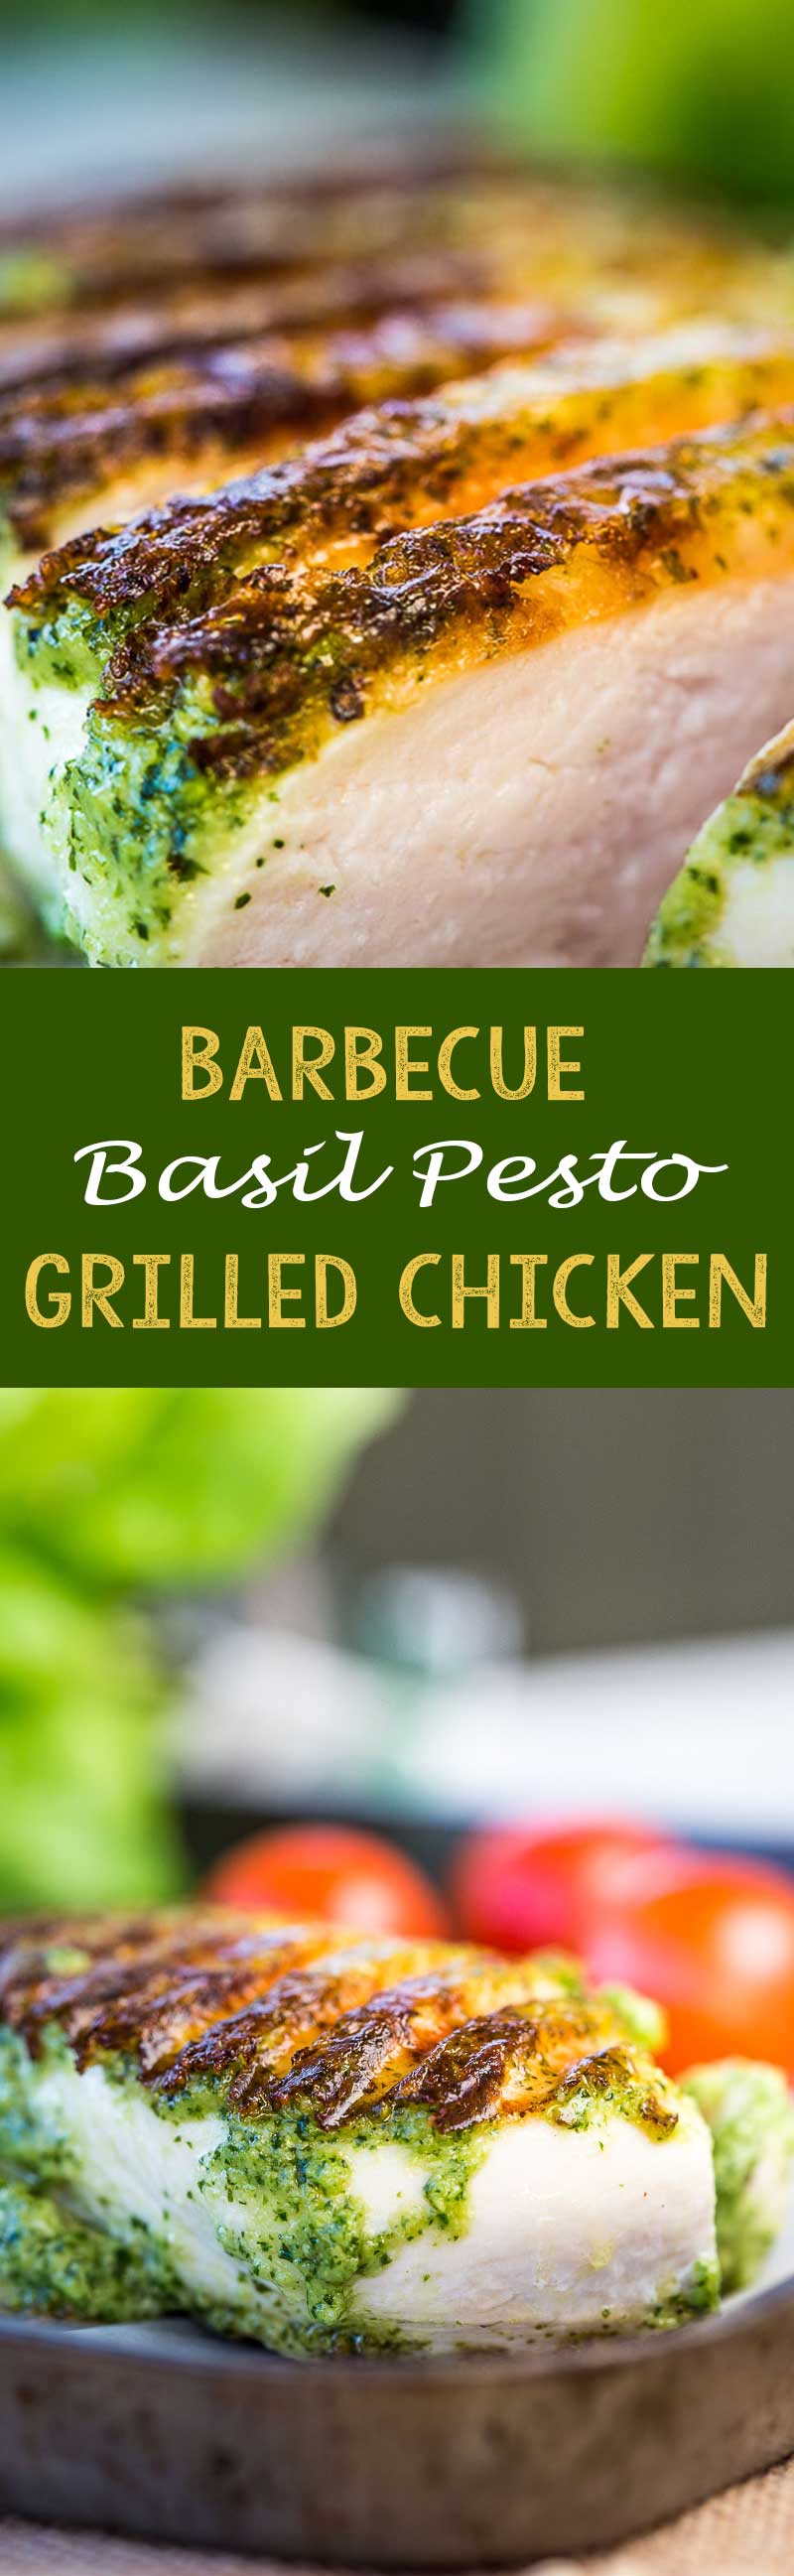 Barbecue pesto chicken grilled on the grill